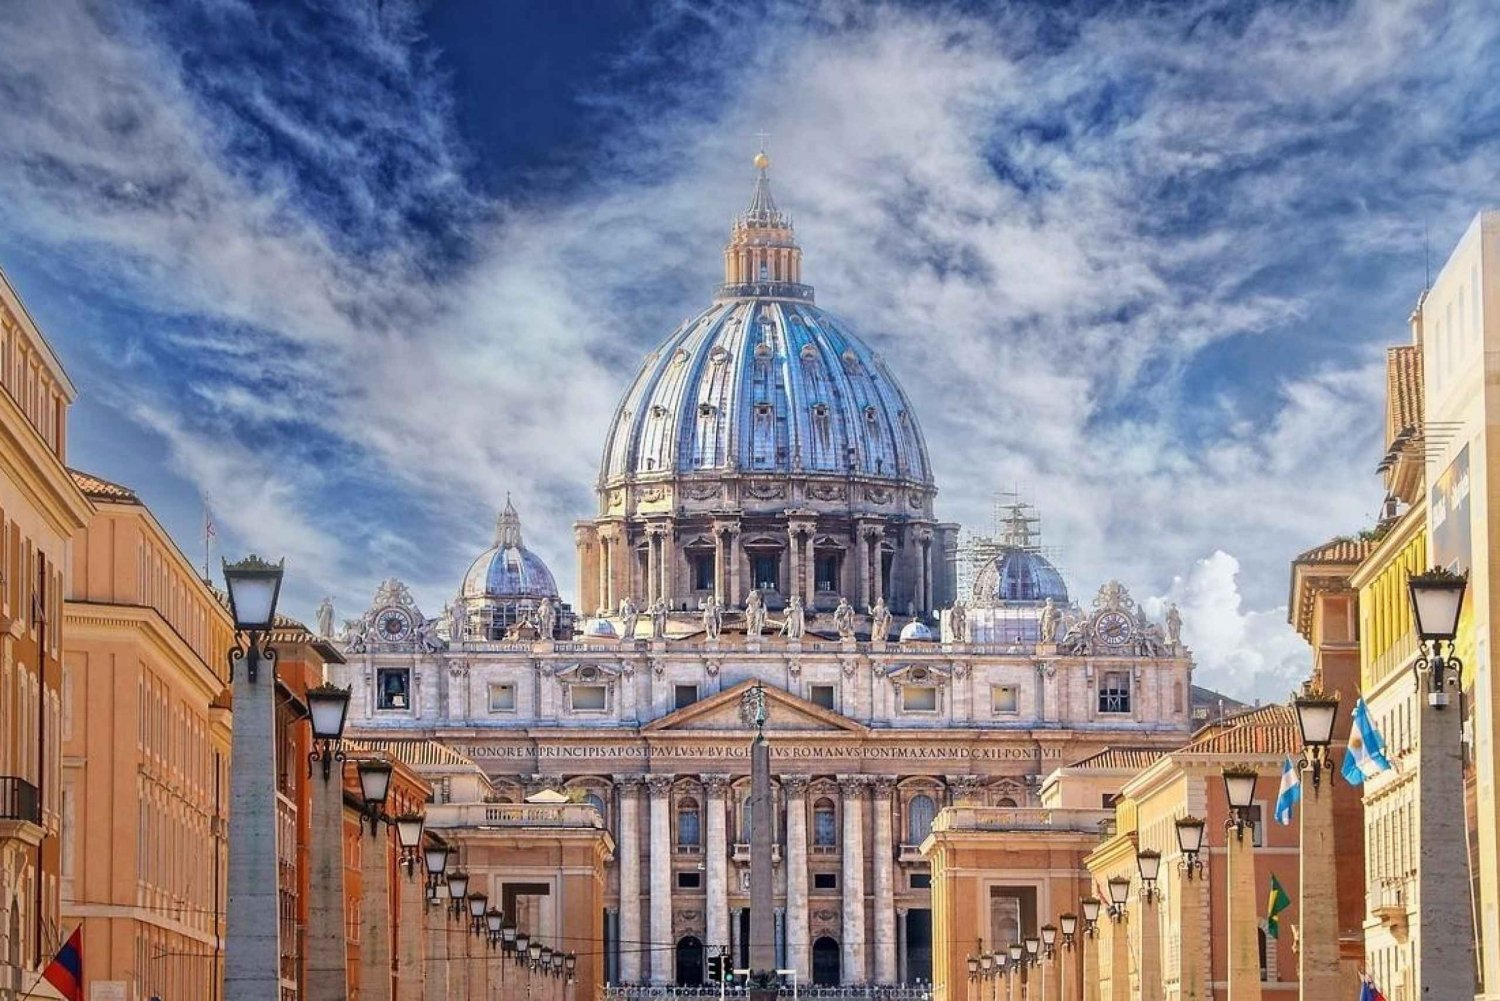 Rome: St. Peter's Basilica and Vatican Grottoes Guided Tour